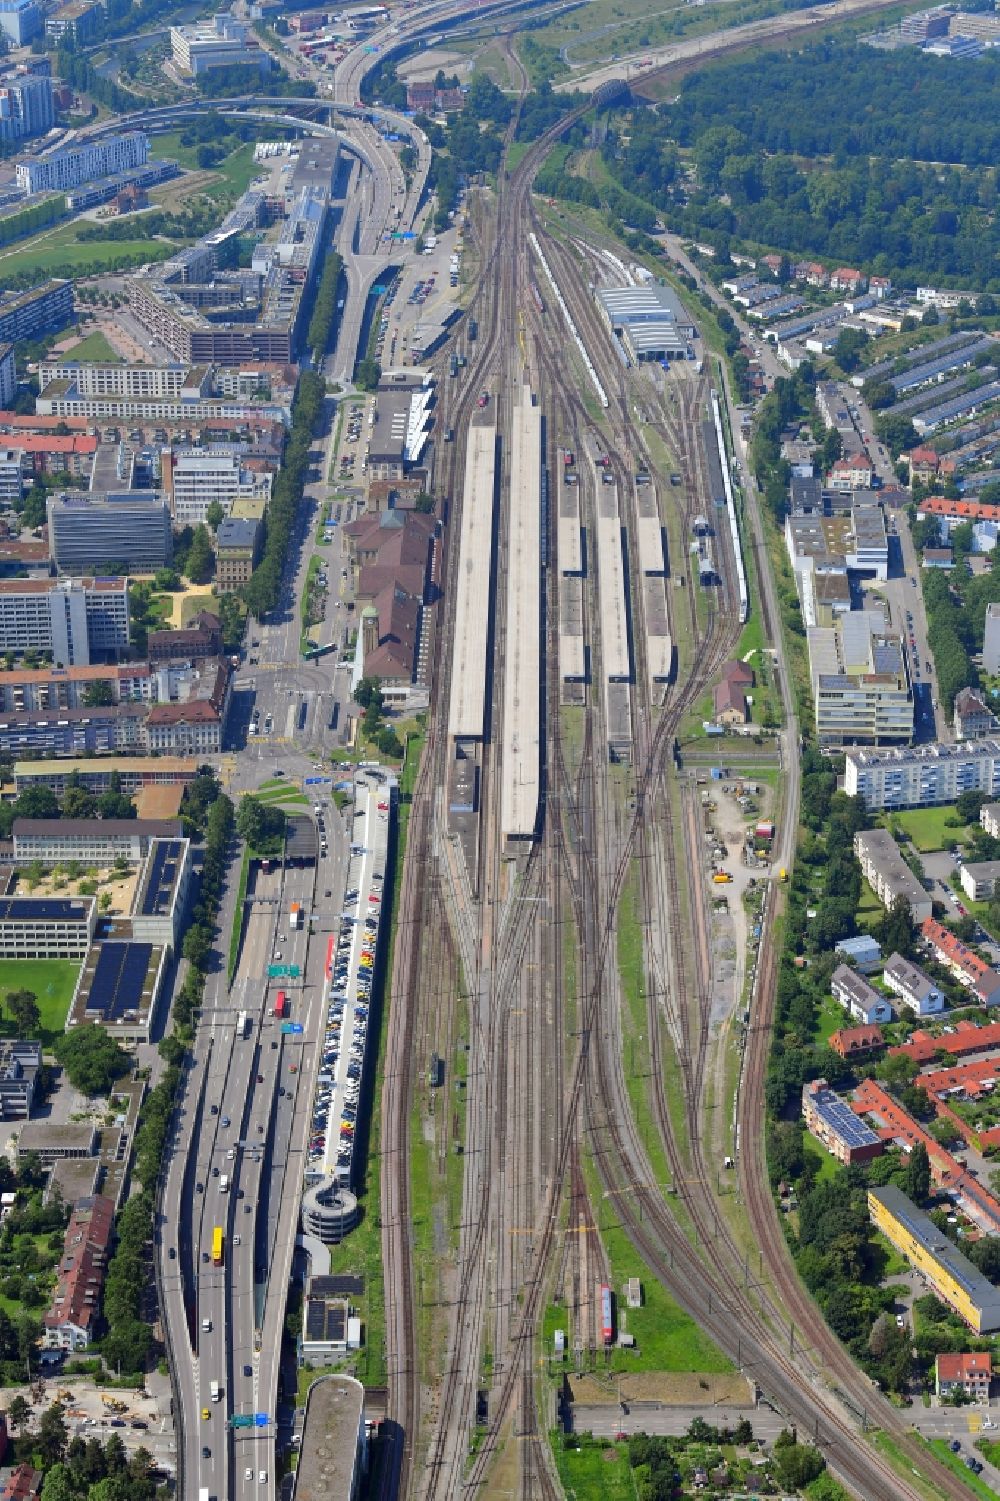 Aerial image Basel - Tracks and buildings of the international station Badischer Bahnhof next to the motorway A3 in Basel, Switzerland